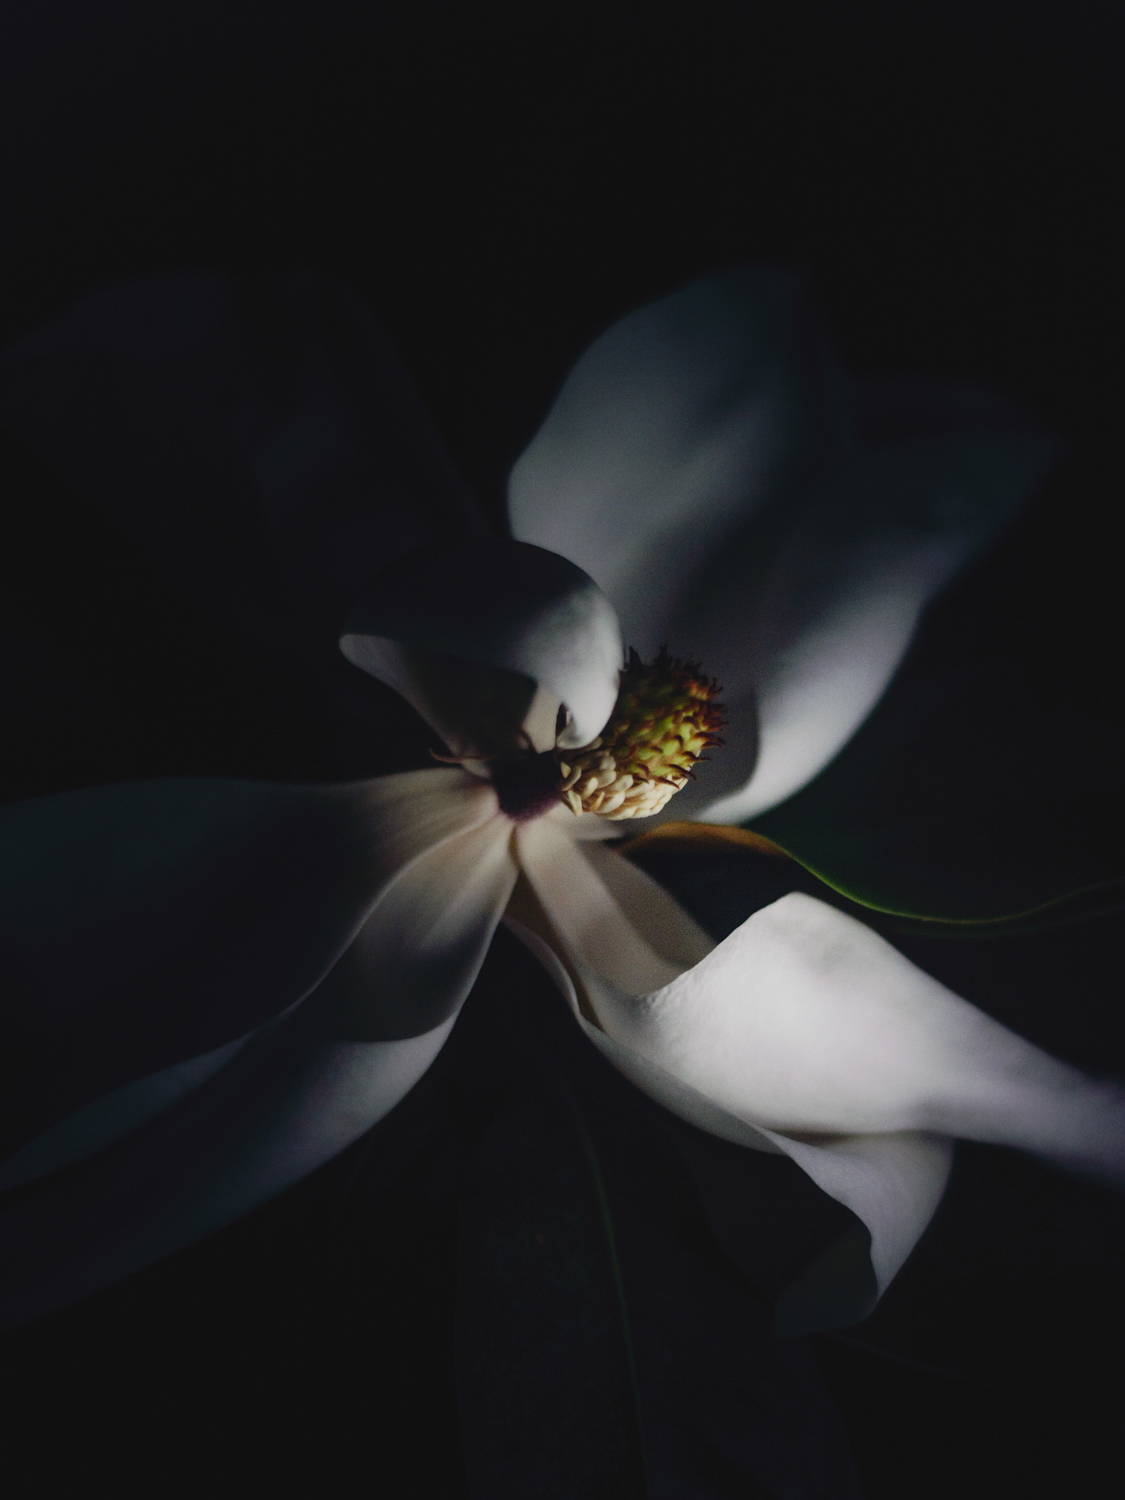 A white flower emerging from the dark